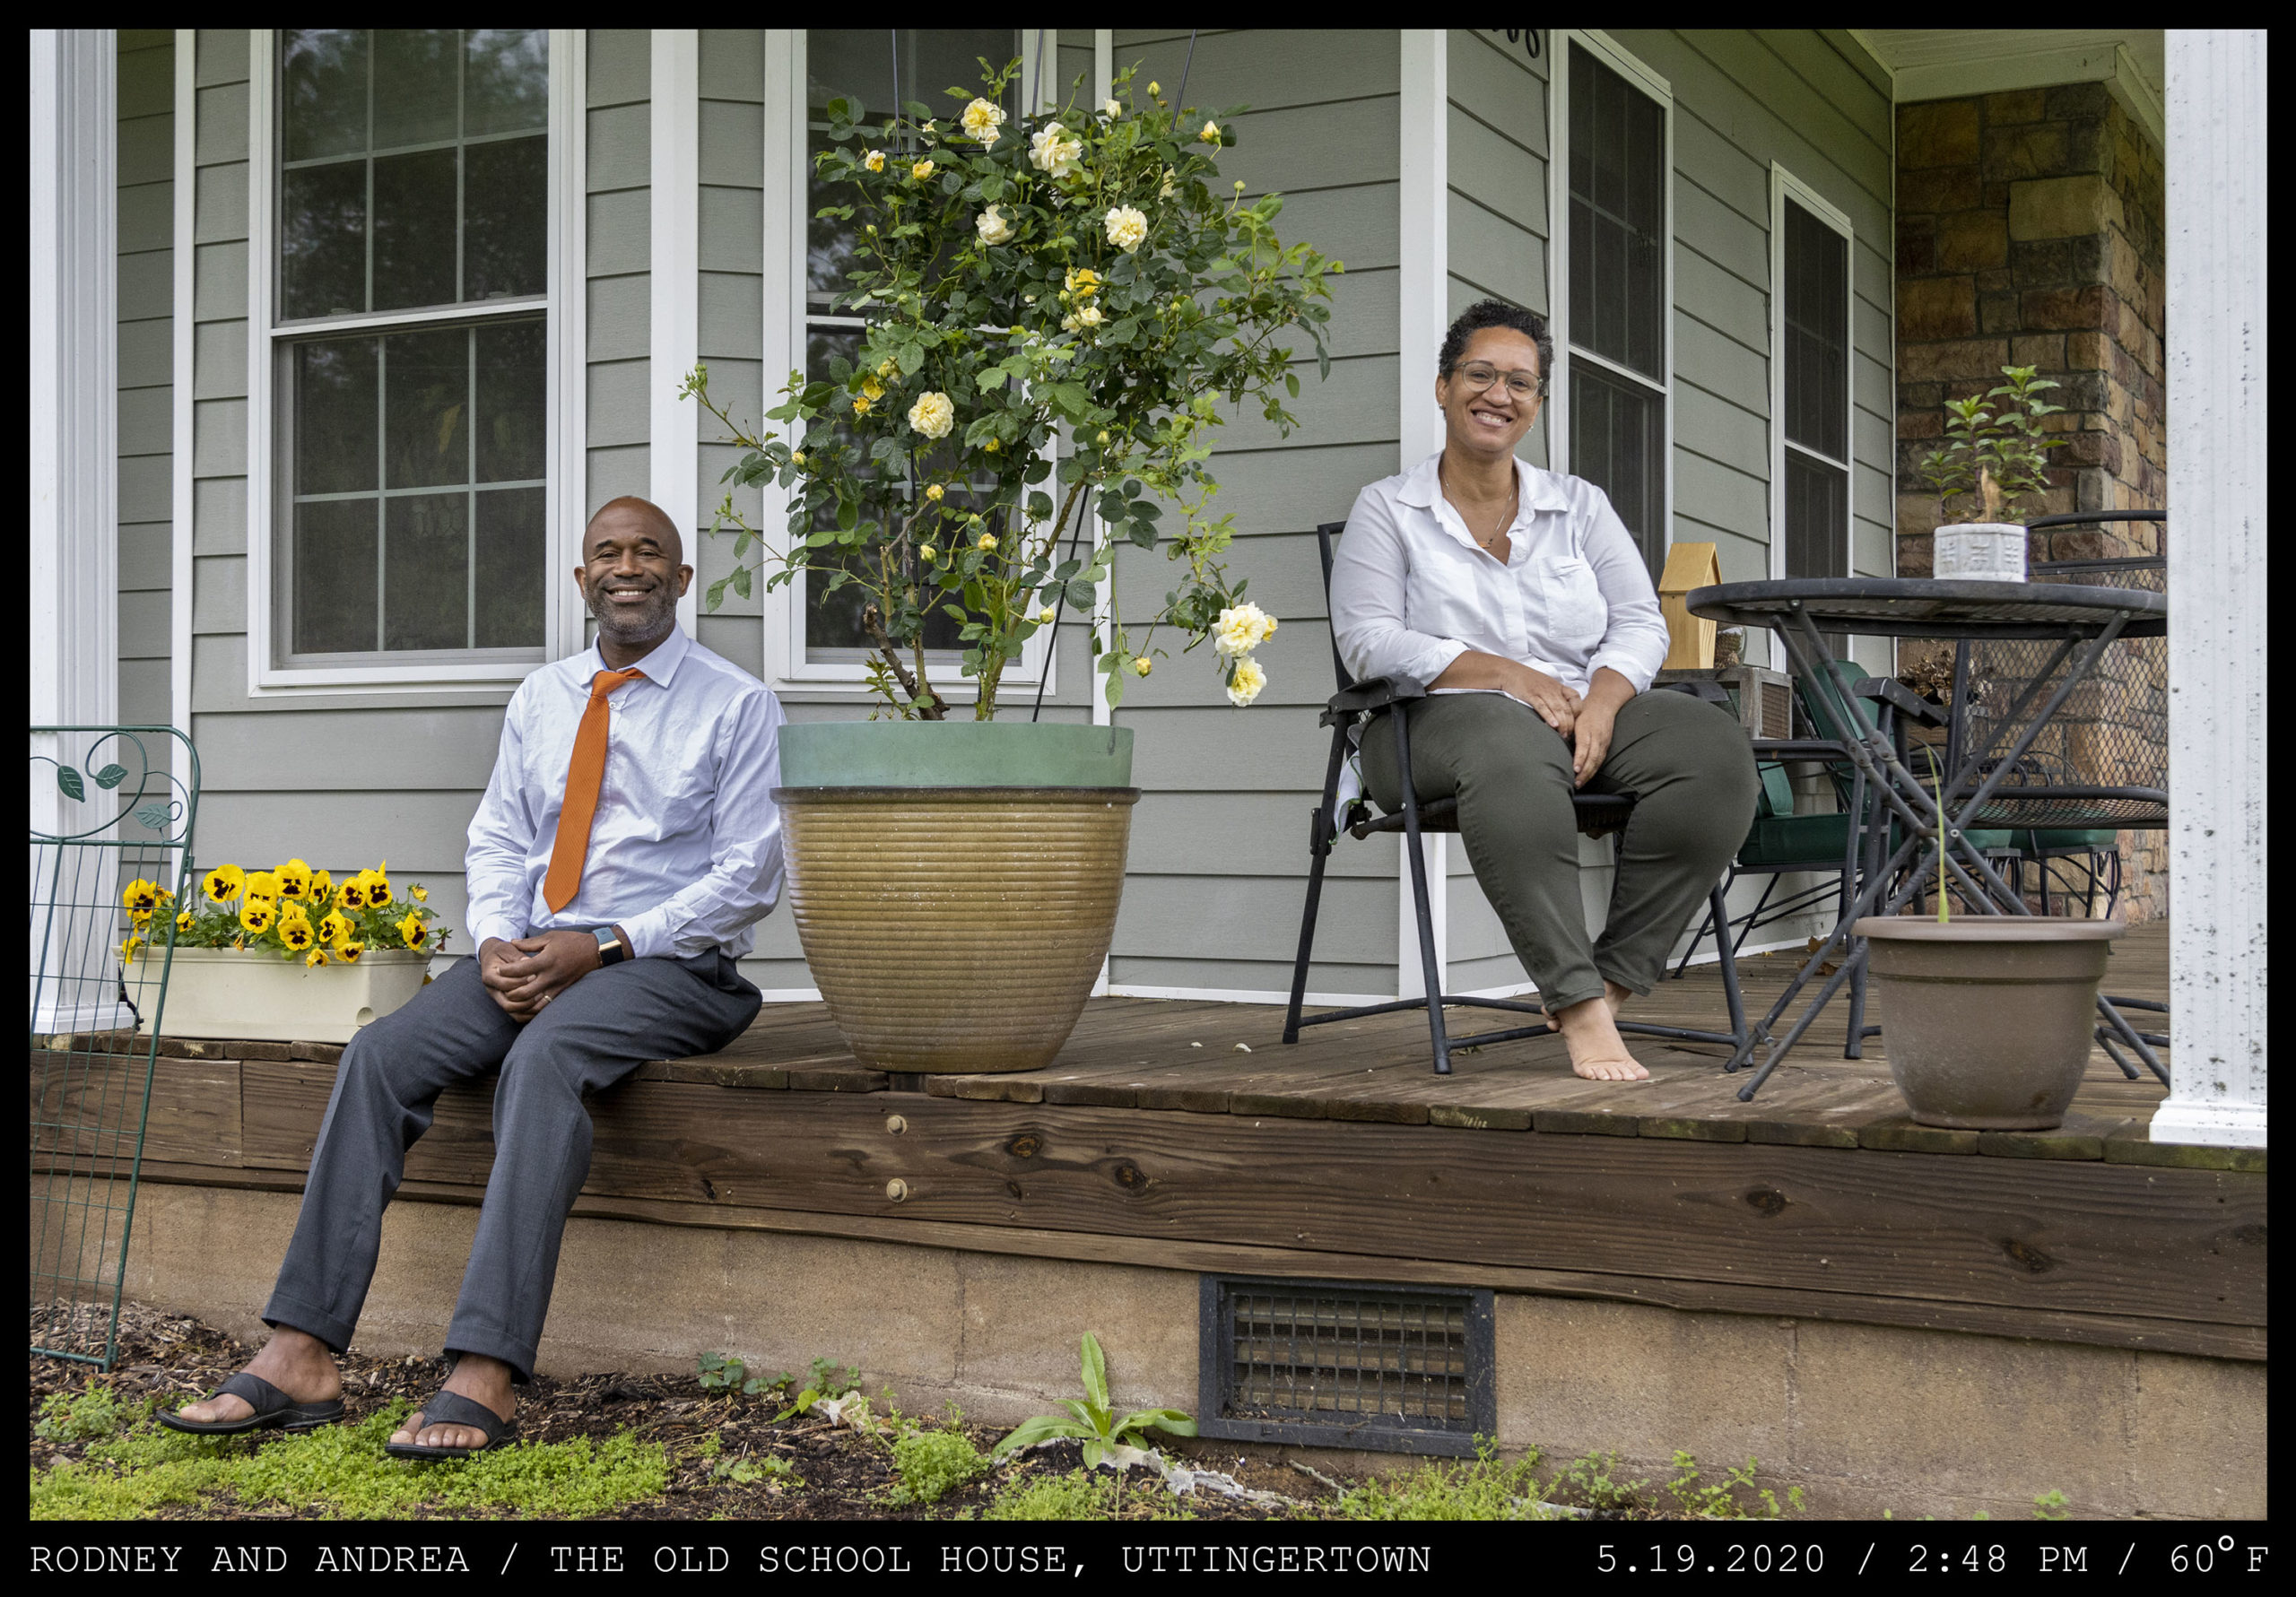 A neatly dressed bald man in an orange tie and leather sandals is seated on the wooden porch of a light freen home next to a woman with short curly hair, barefoot wearing a white button up shirt.